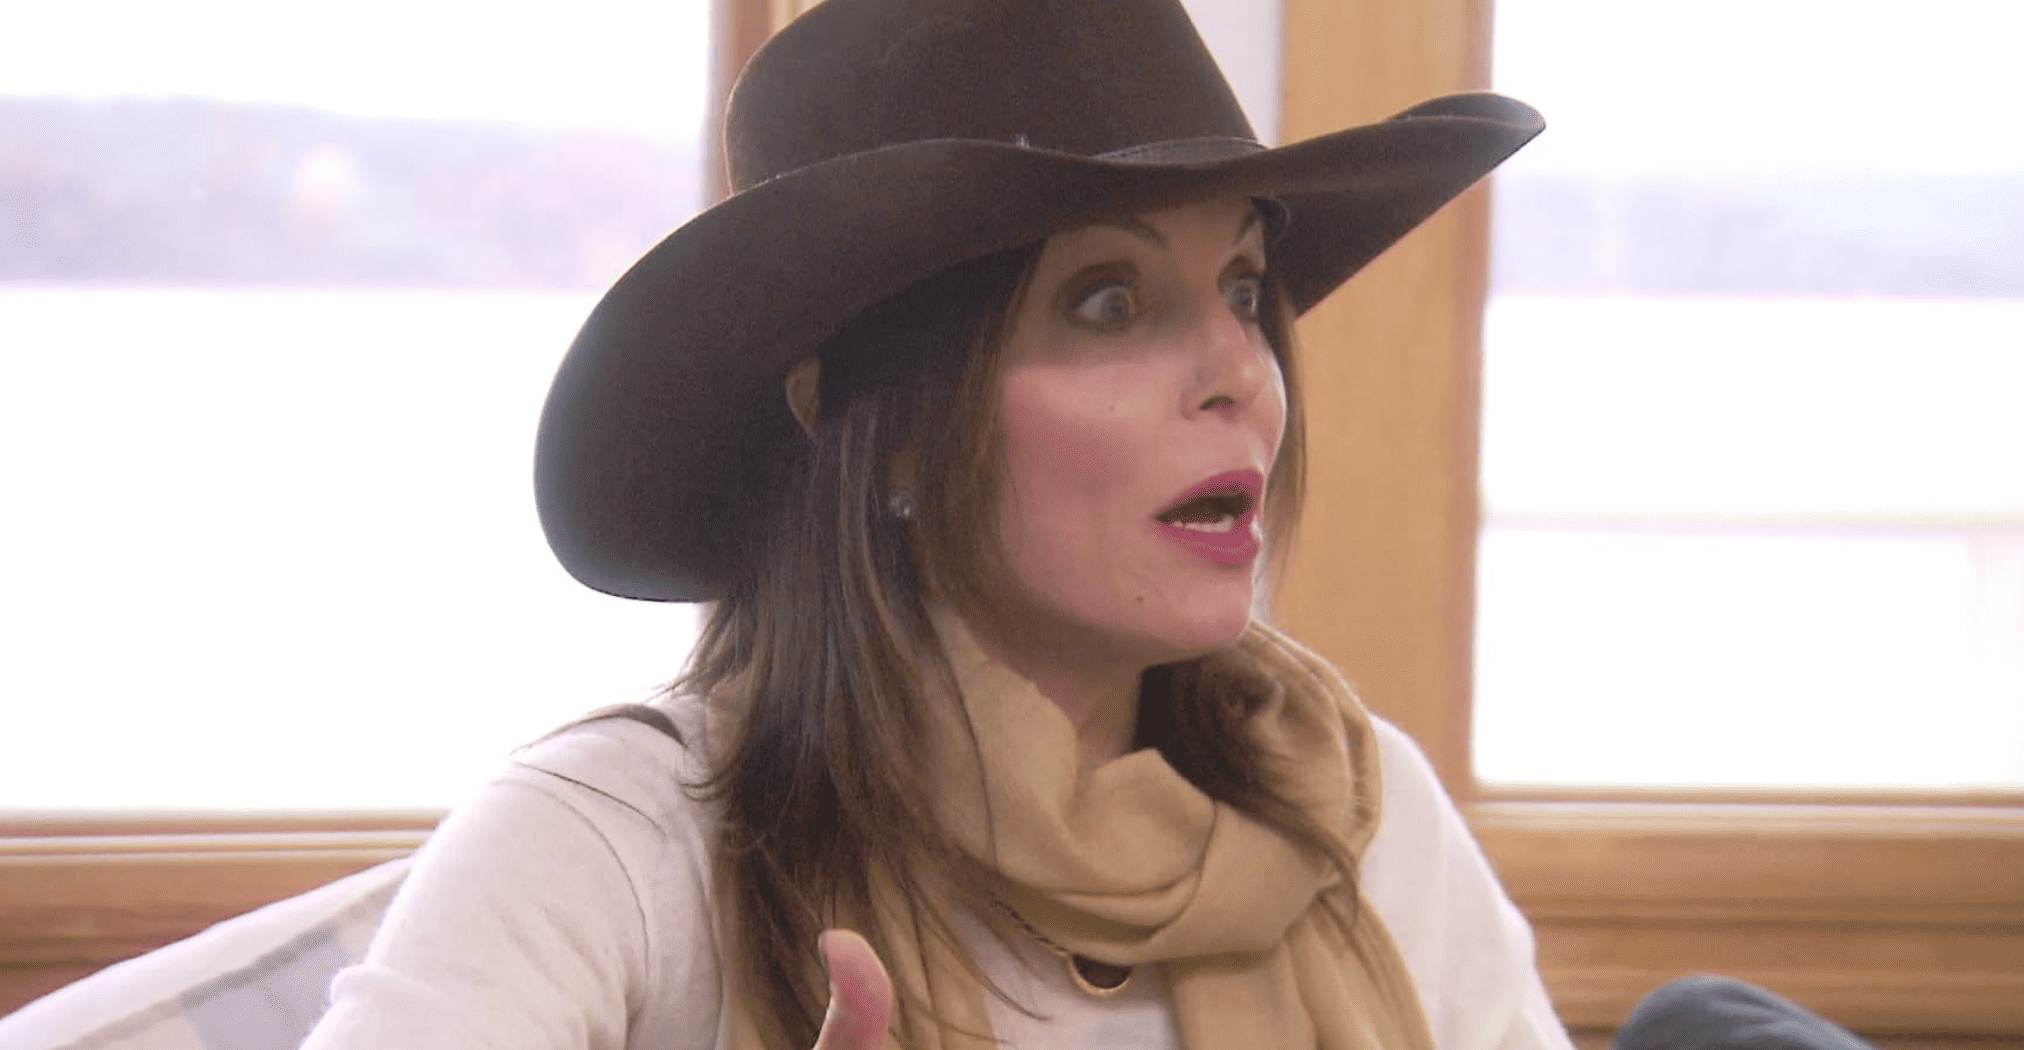 A woman wearing a cowboy hat looks stunned in this image from Ricochet Television